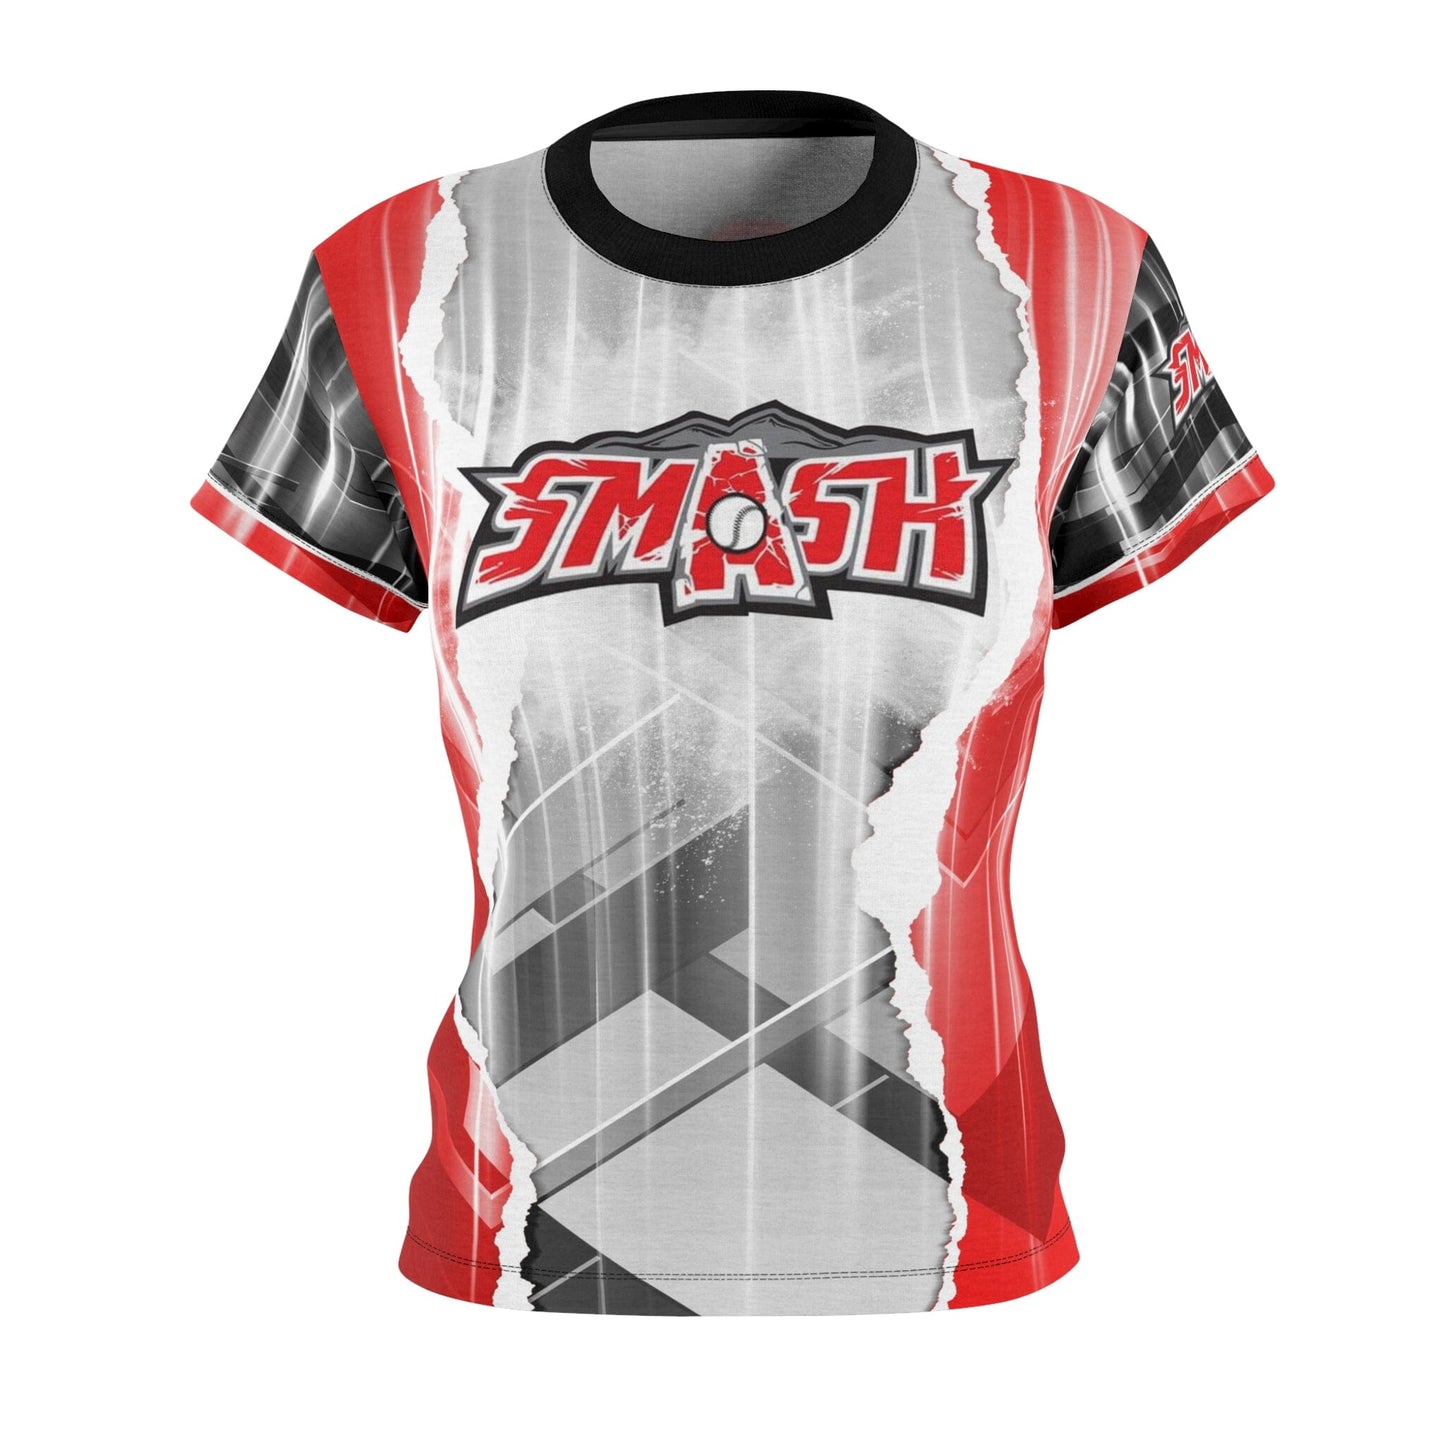 RIPPED - Women's Full Sublimated Sportswear Shirt-Photoshop Template - PSMGraphix